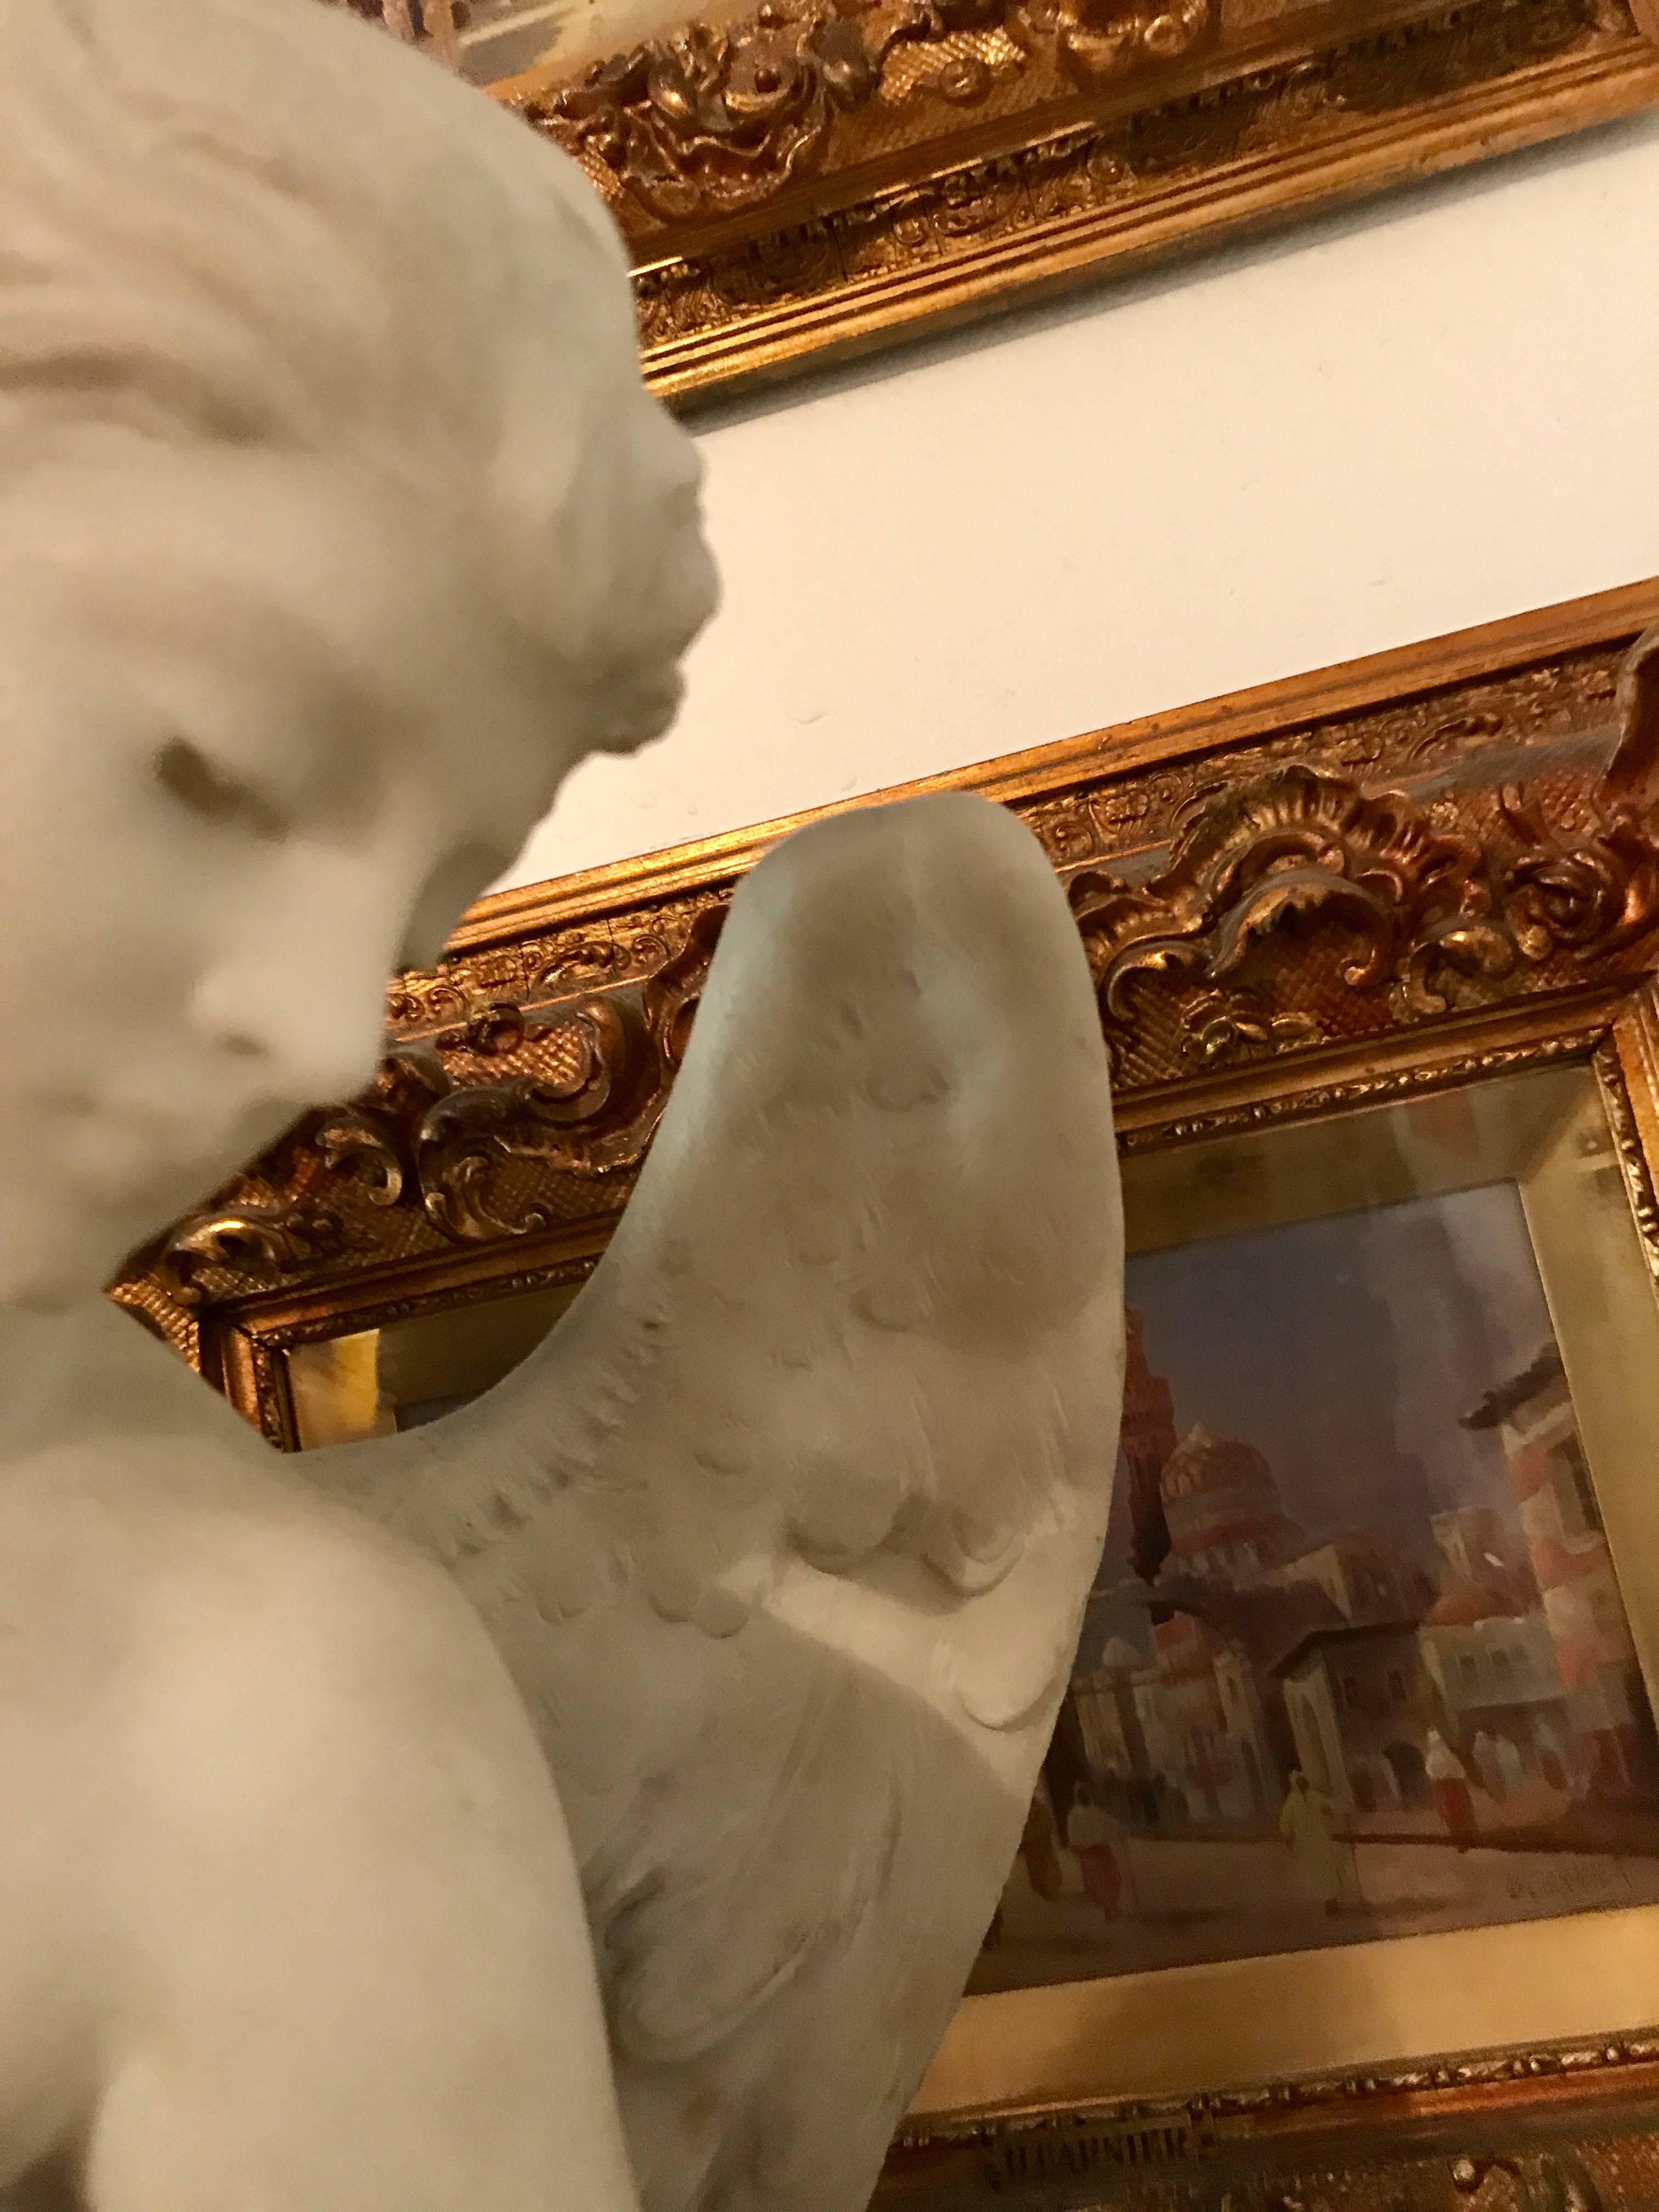 Tycoon's Italian Carrara Marble Angel Sculpture Signed A. Piazza, circa 1890 In Good Condition For Sale In West Palm Beach, FL